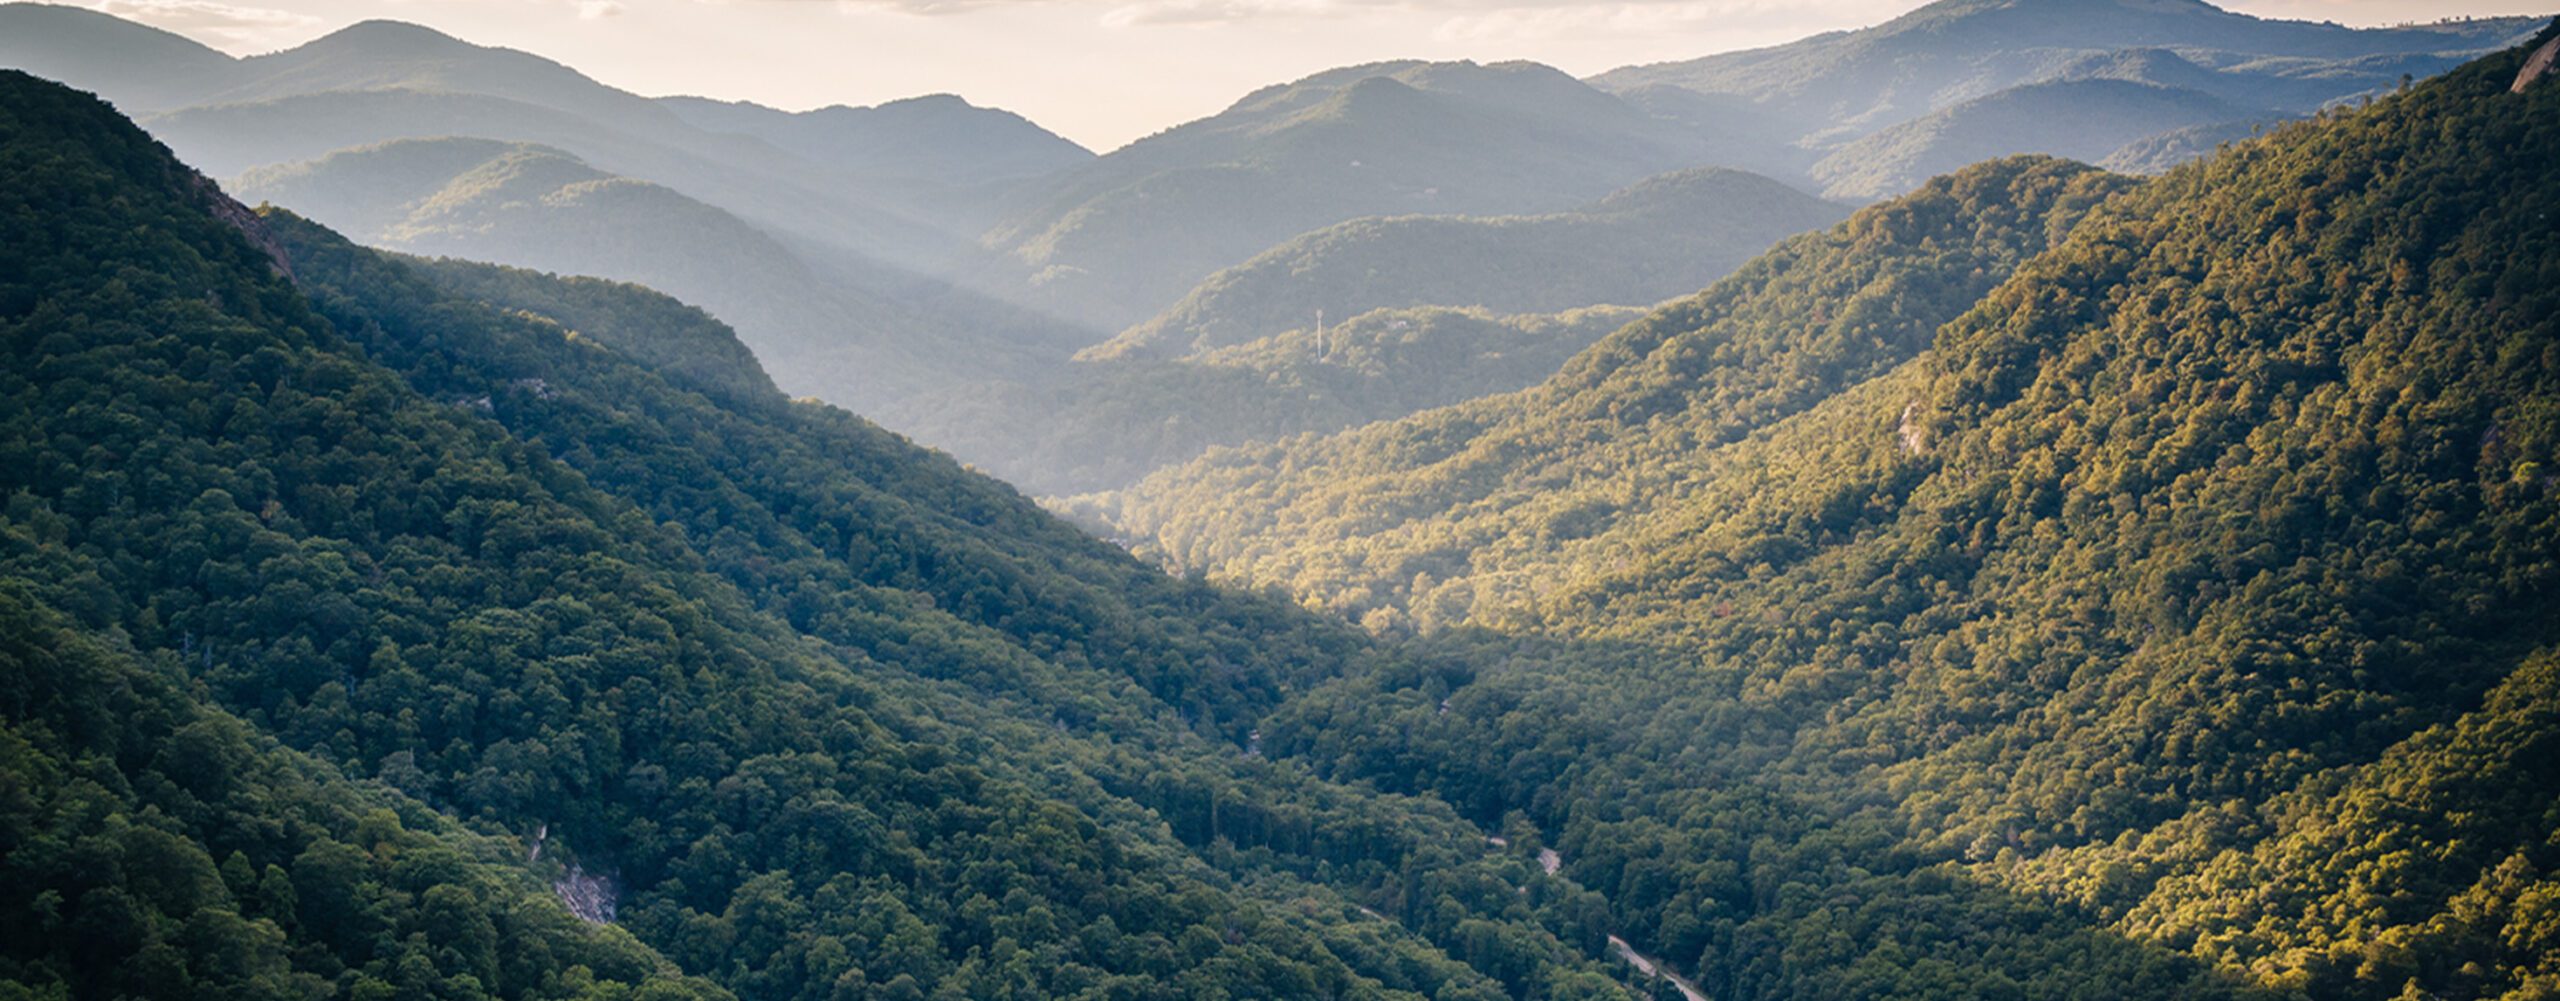 View of Mountains from Chimney Rock State Park, North Carolina